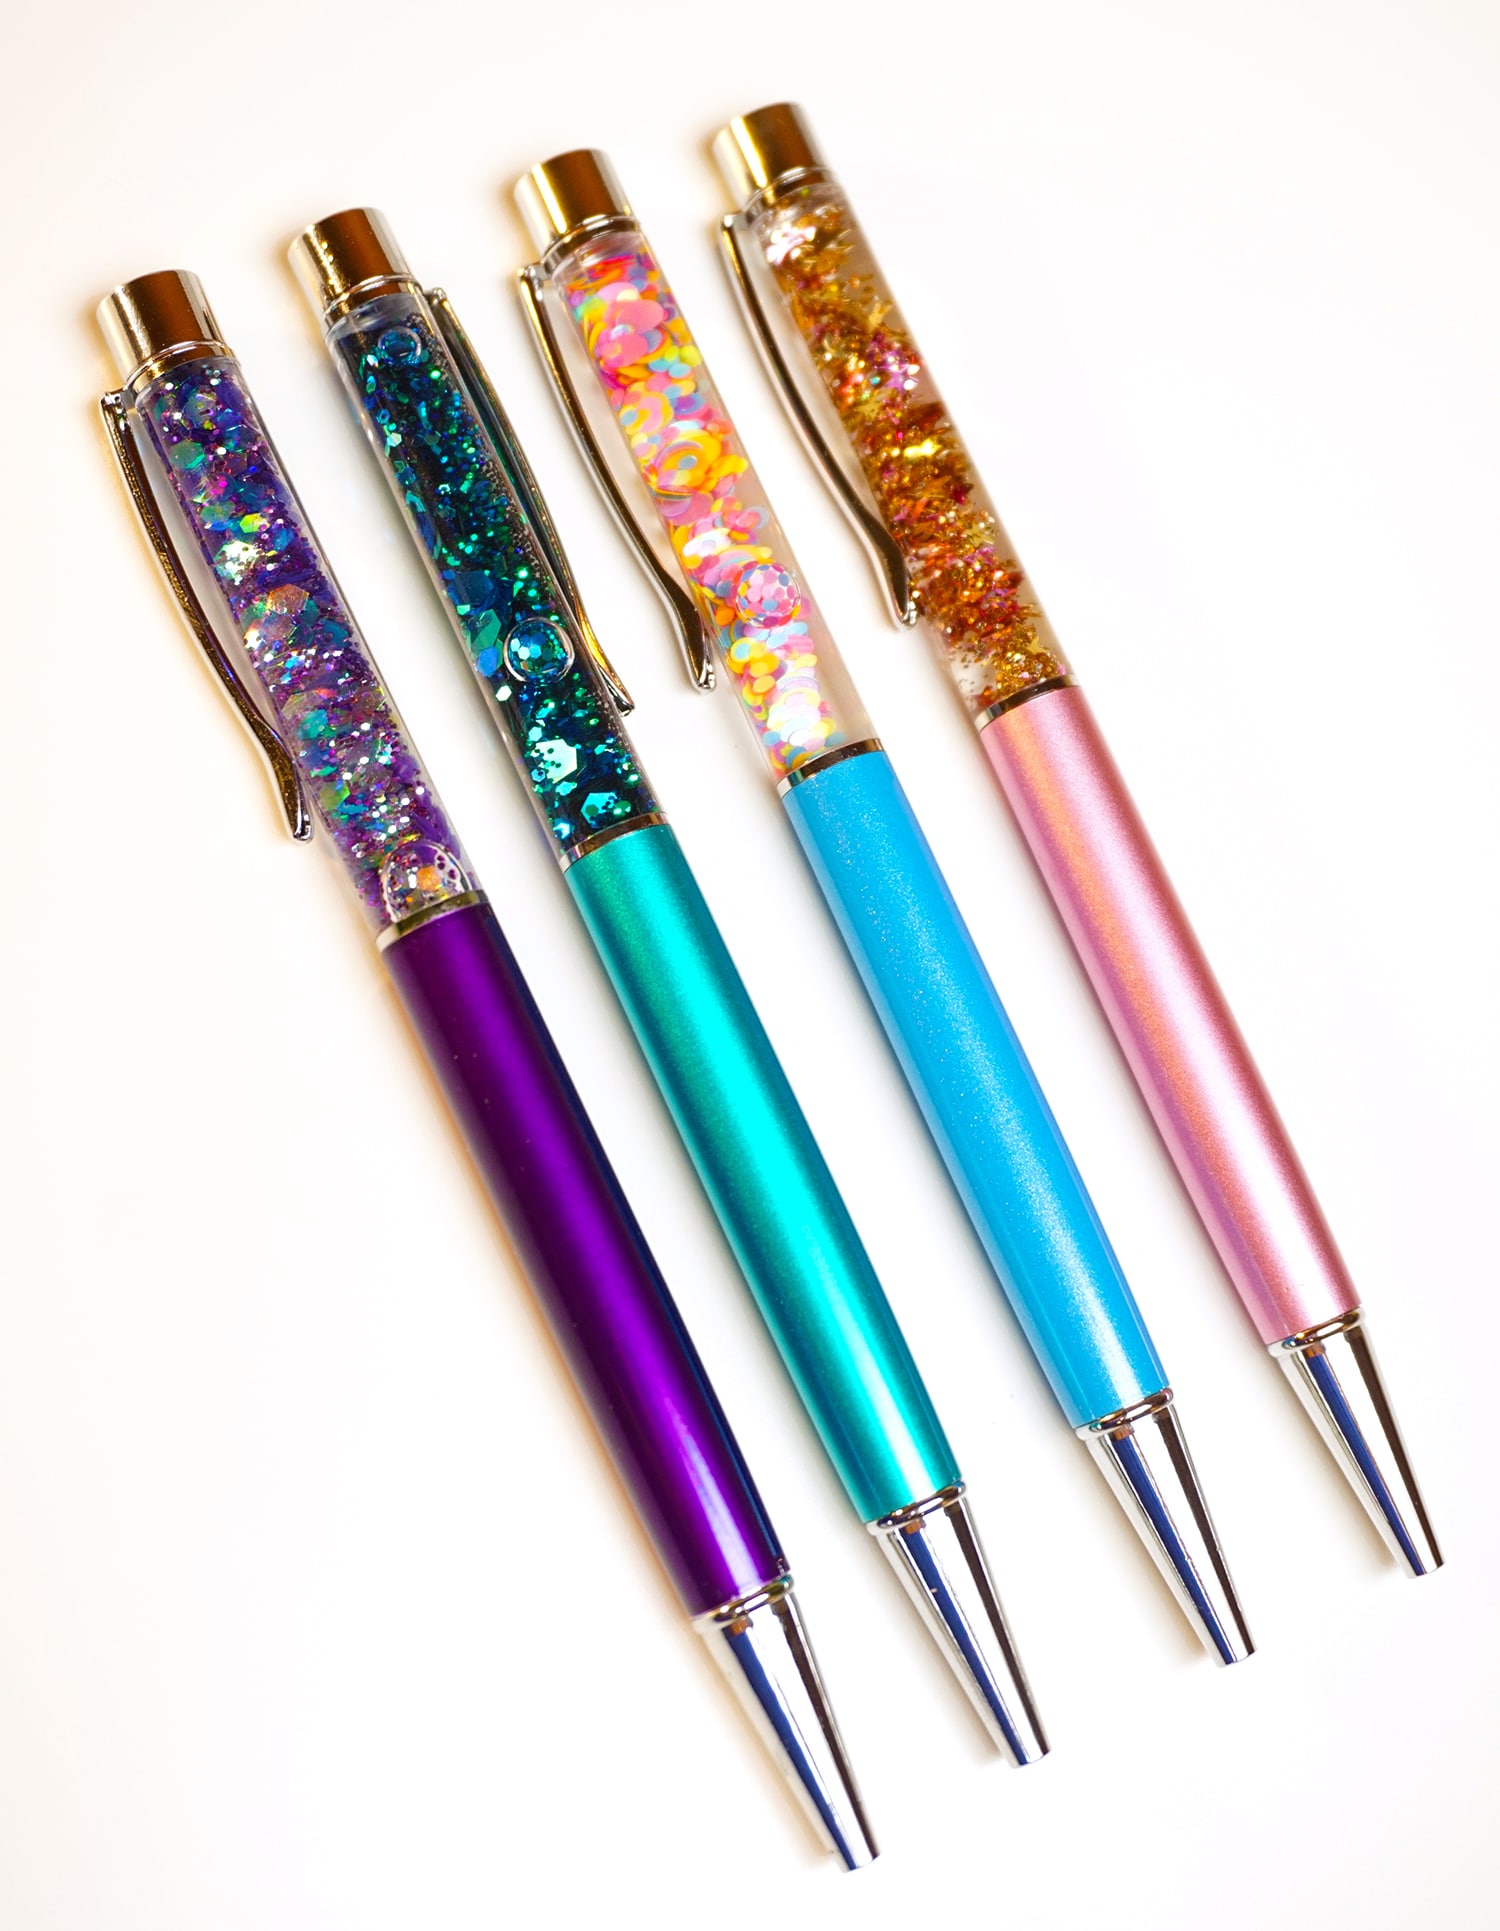 How to Make Glitter Pens the Easy Way